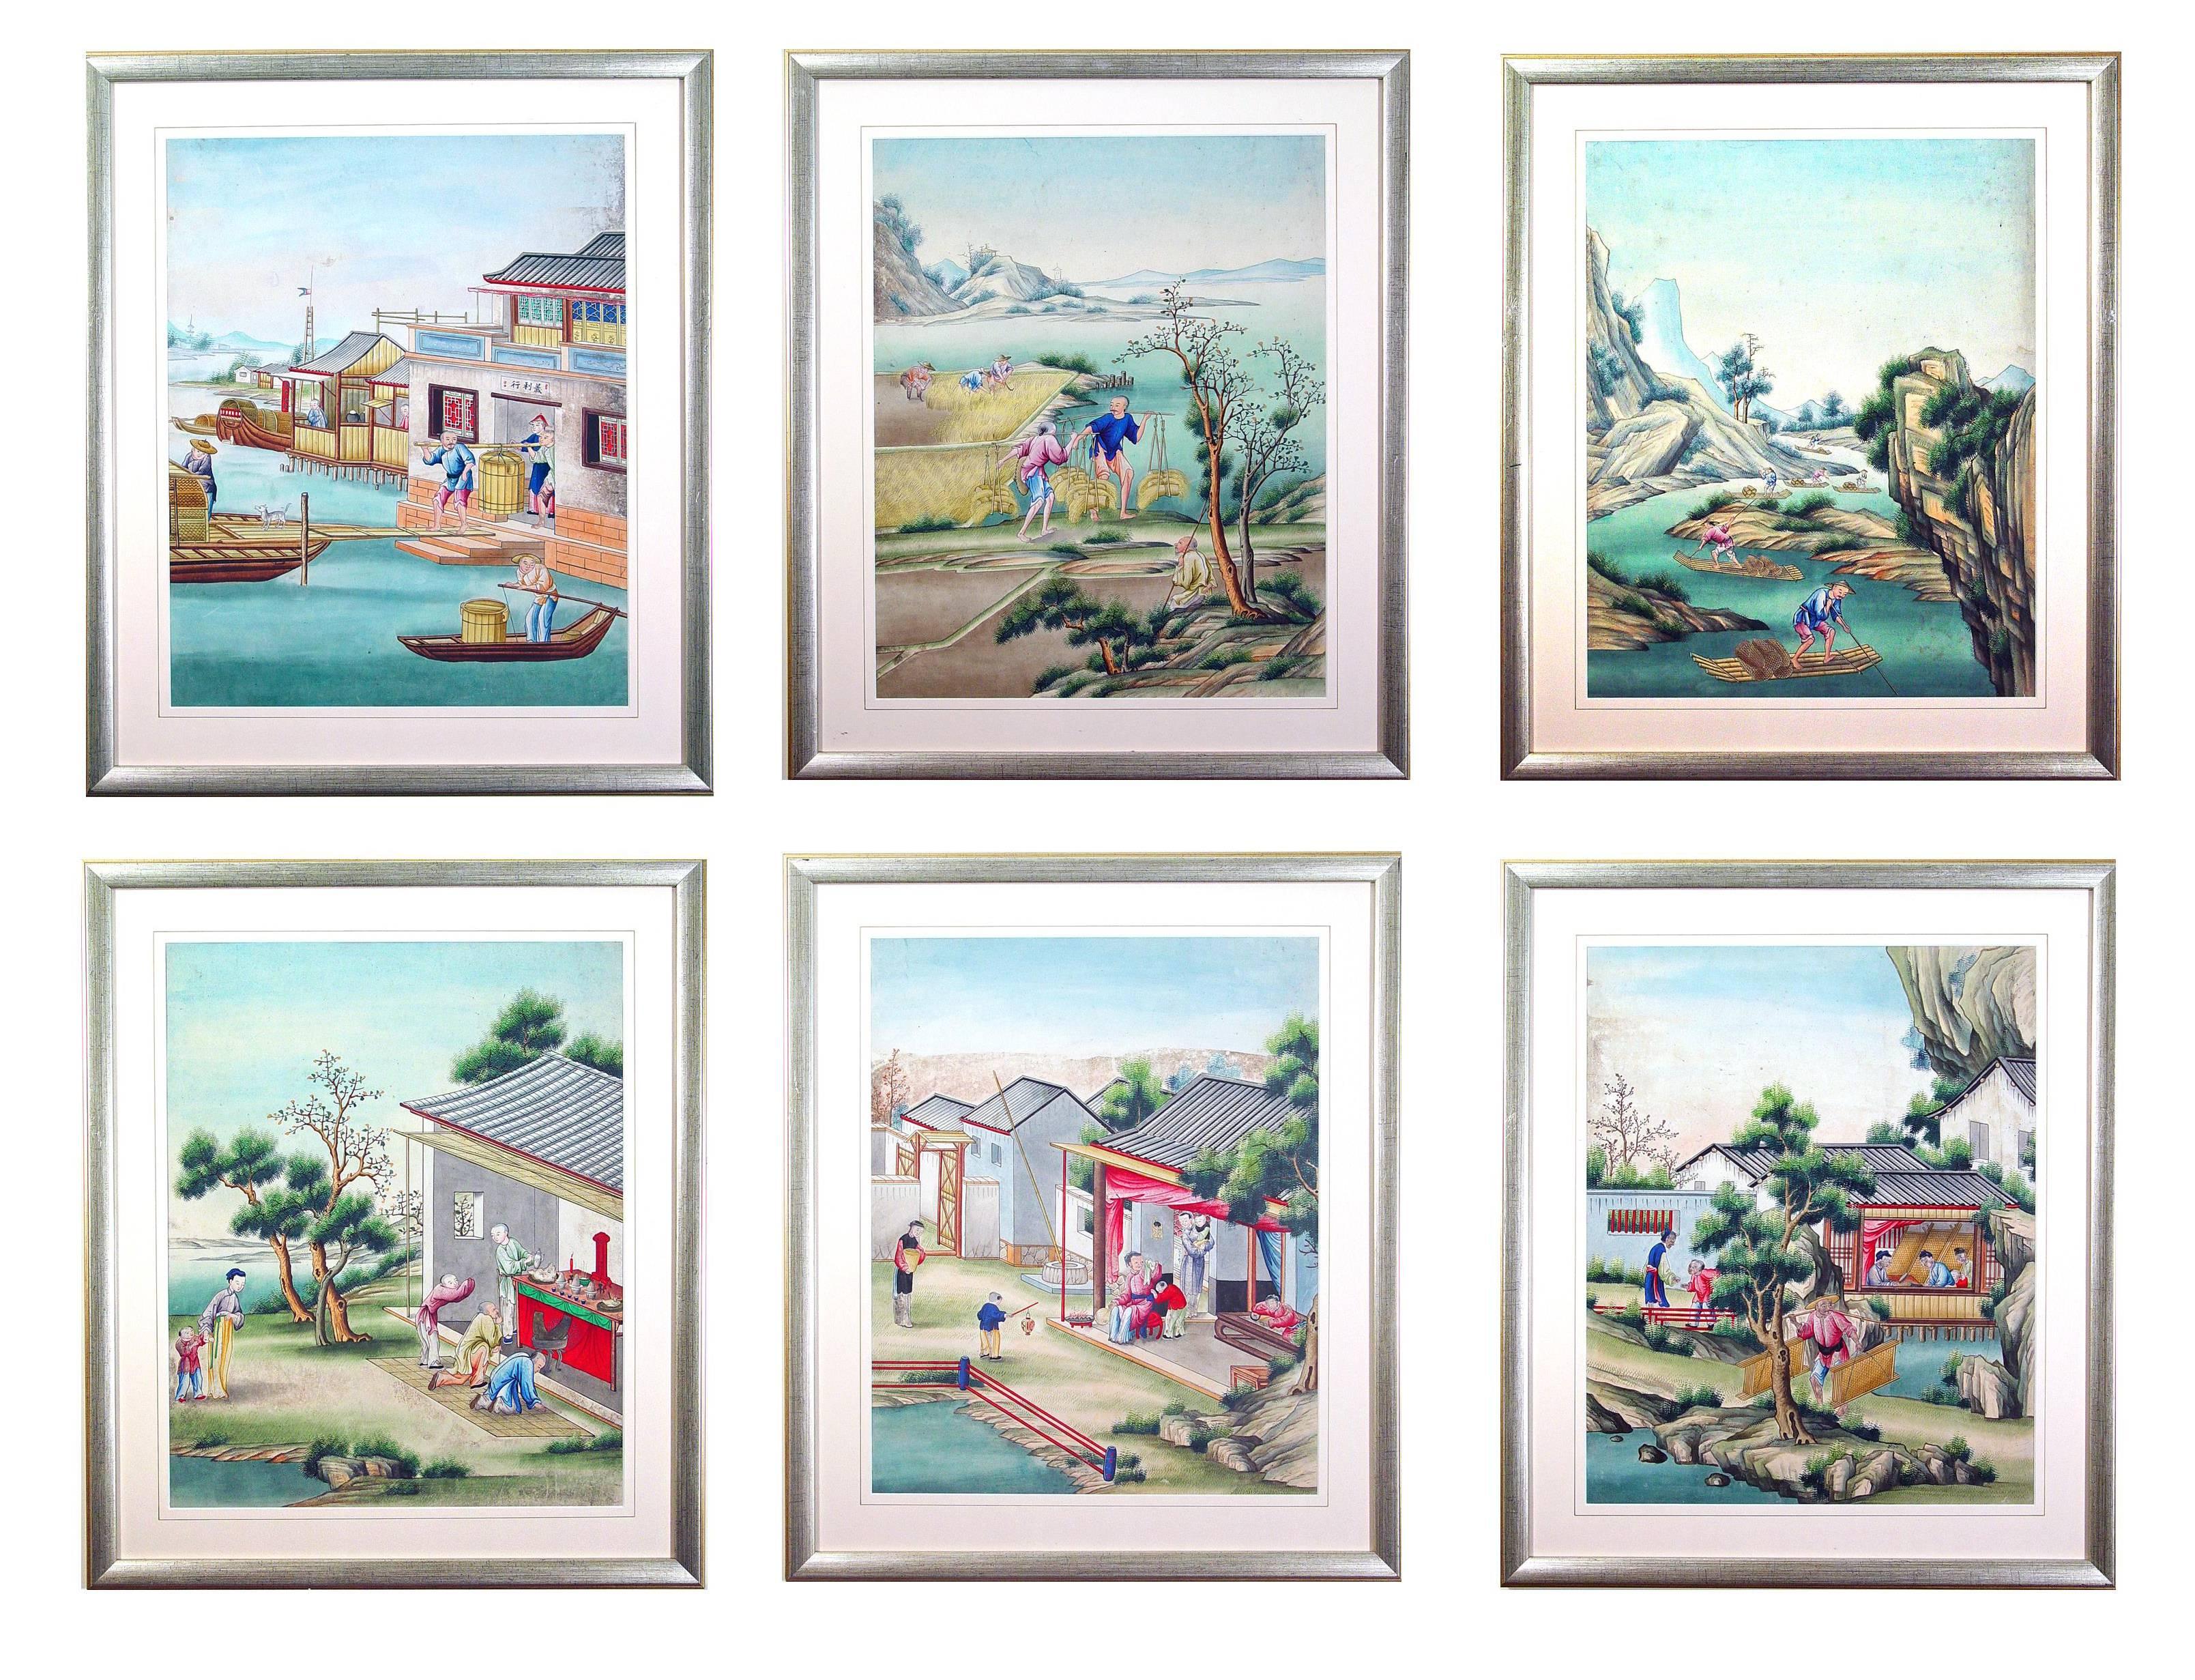 The particularly large Chinese watercolor and gouache paintings on paper depict various scenes of everyday Chinese life. All are framed and glazed.

These can be sold in smaller numbers- individually or as pairs.